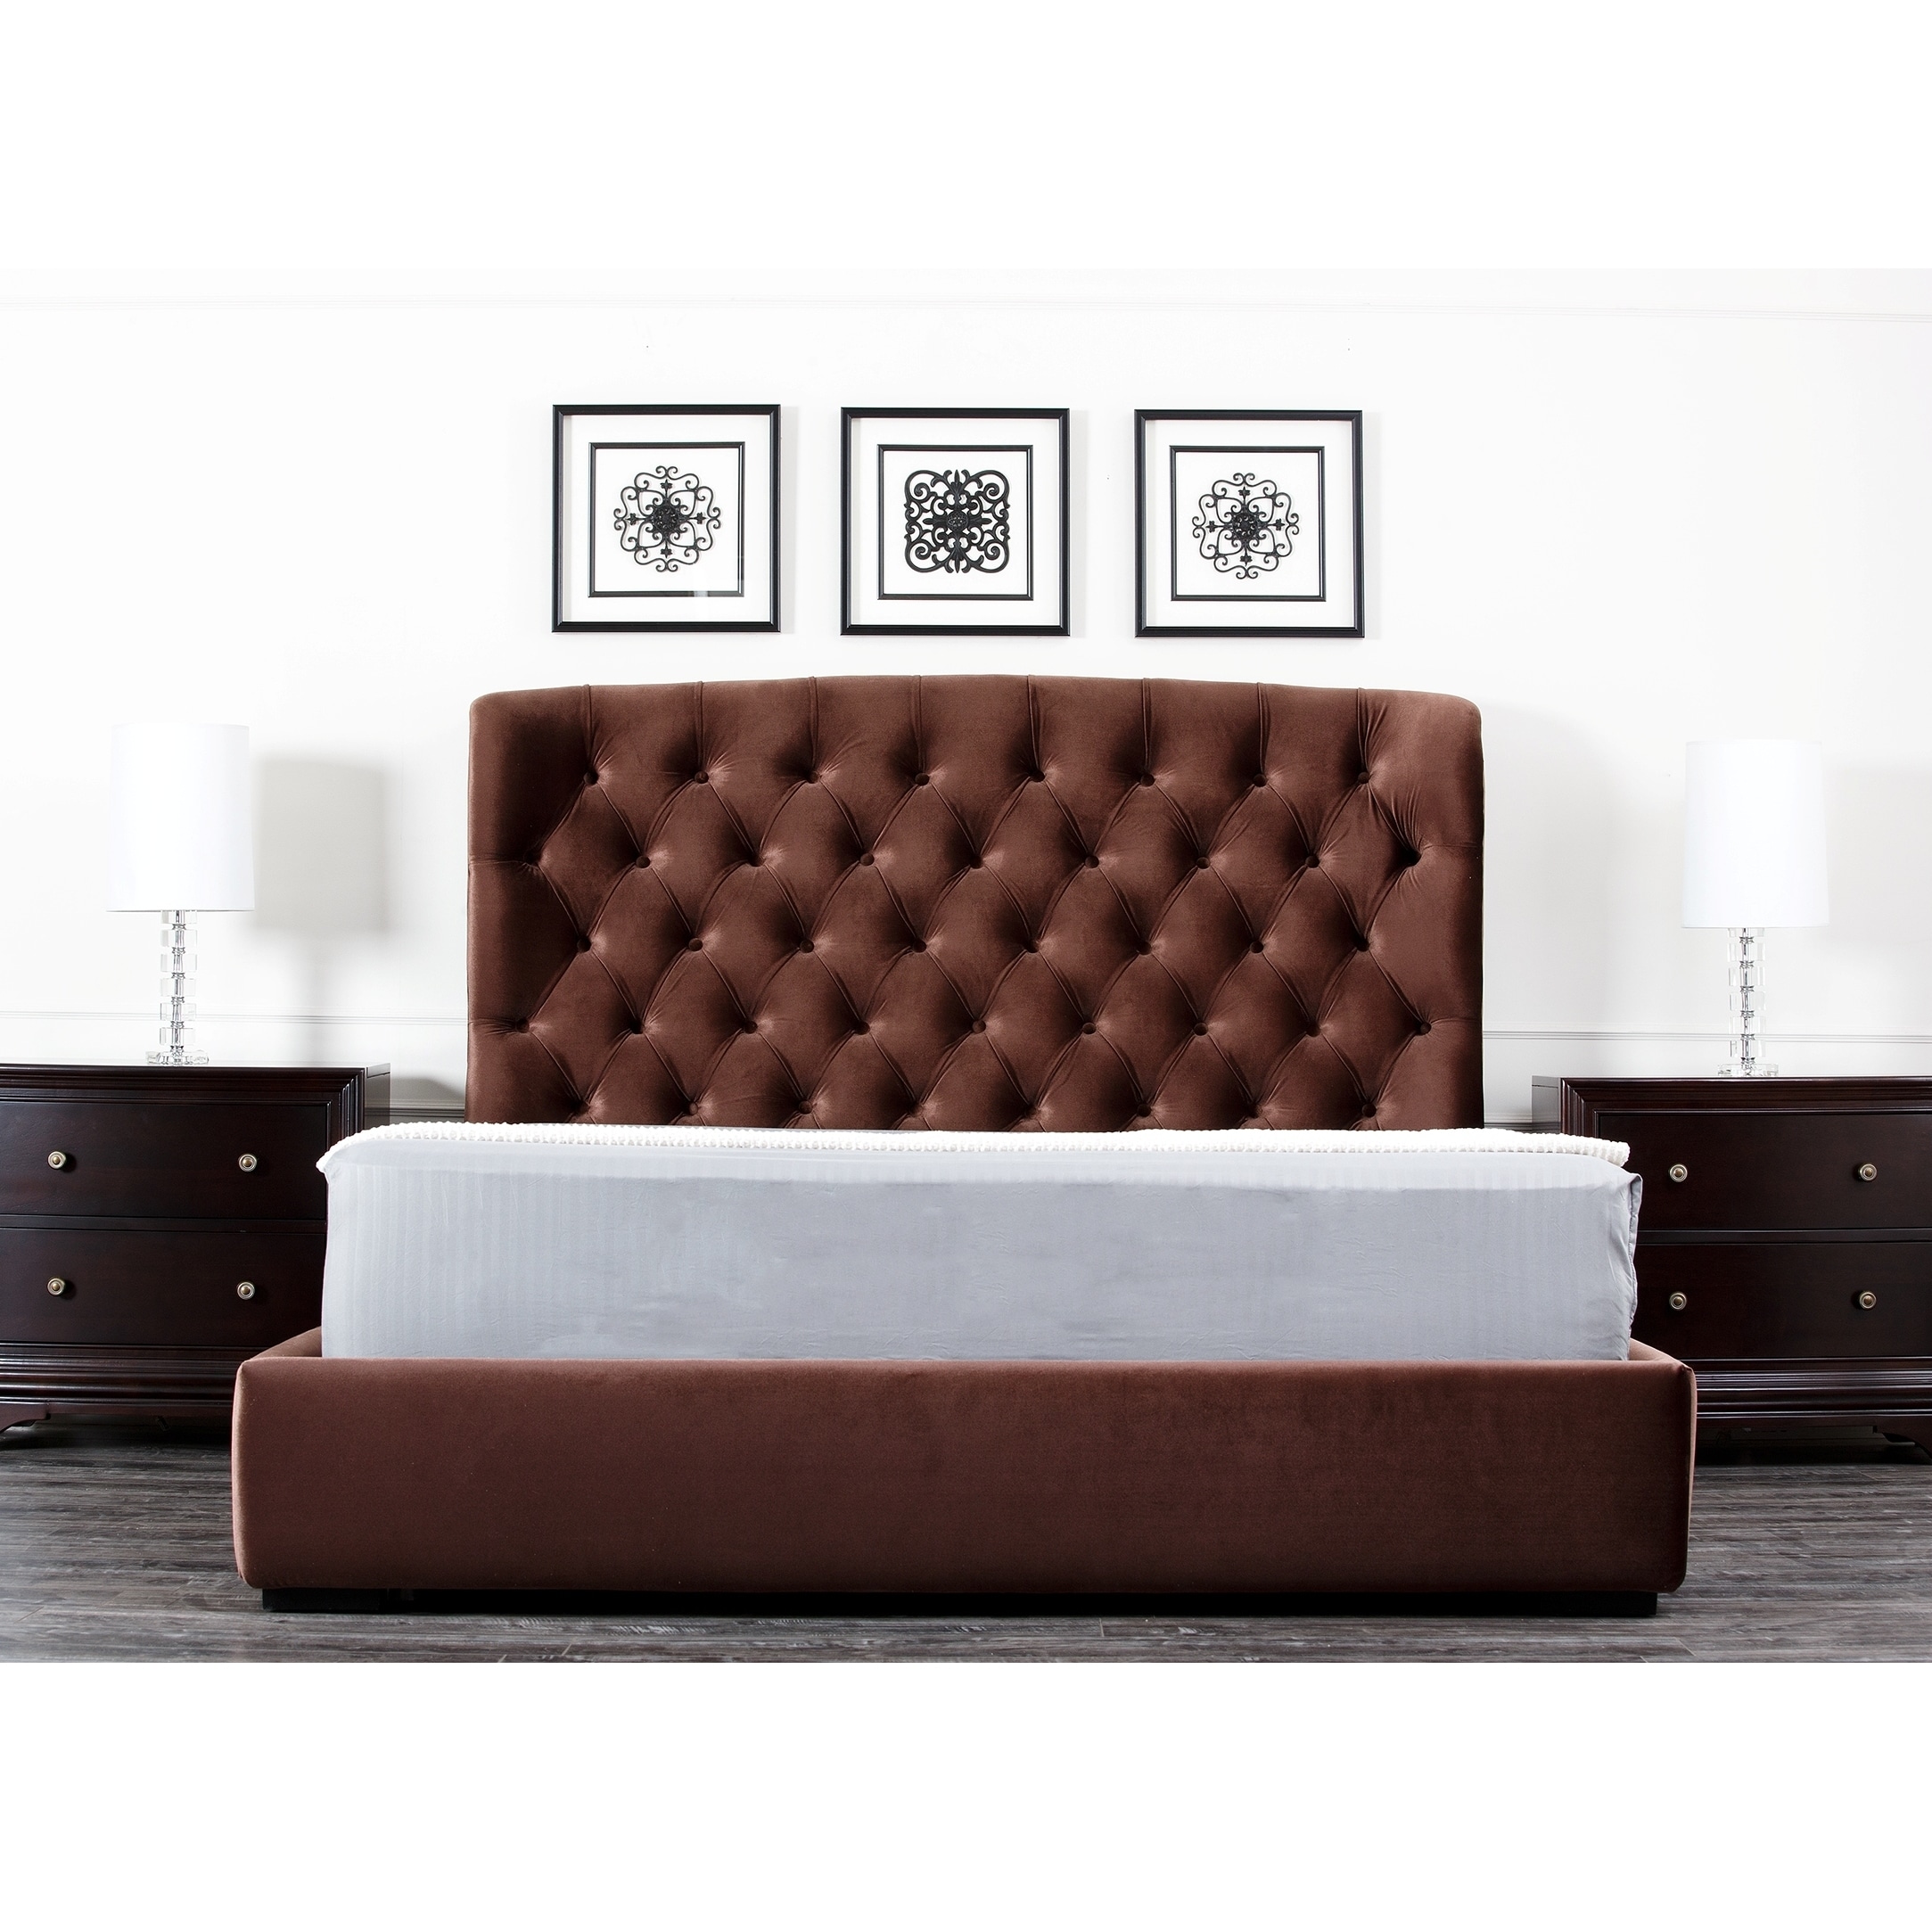 Abbyson Living Presidio Chocolate Tufted Upholstered Queen size Bed